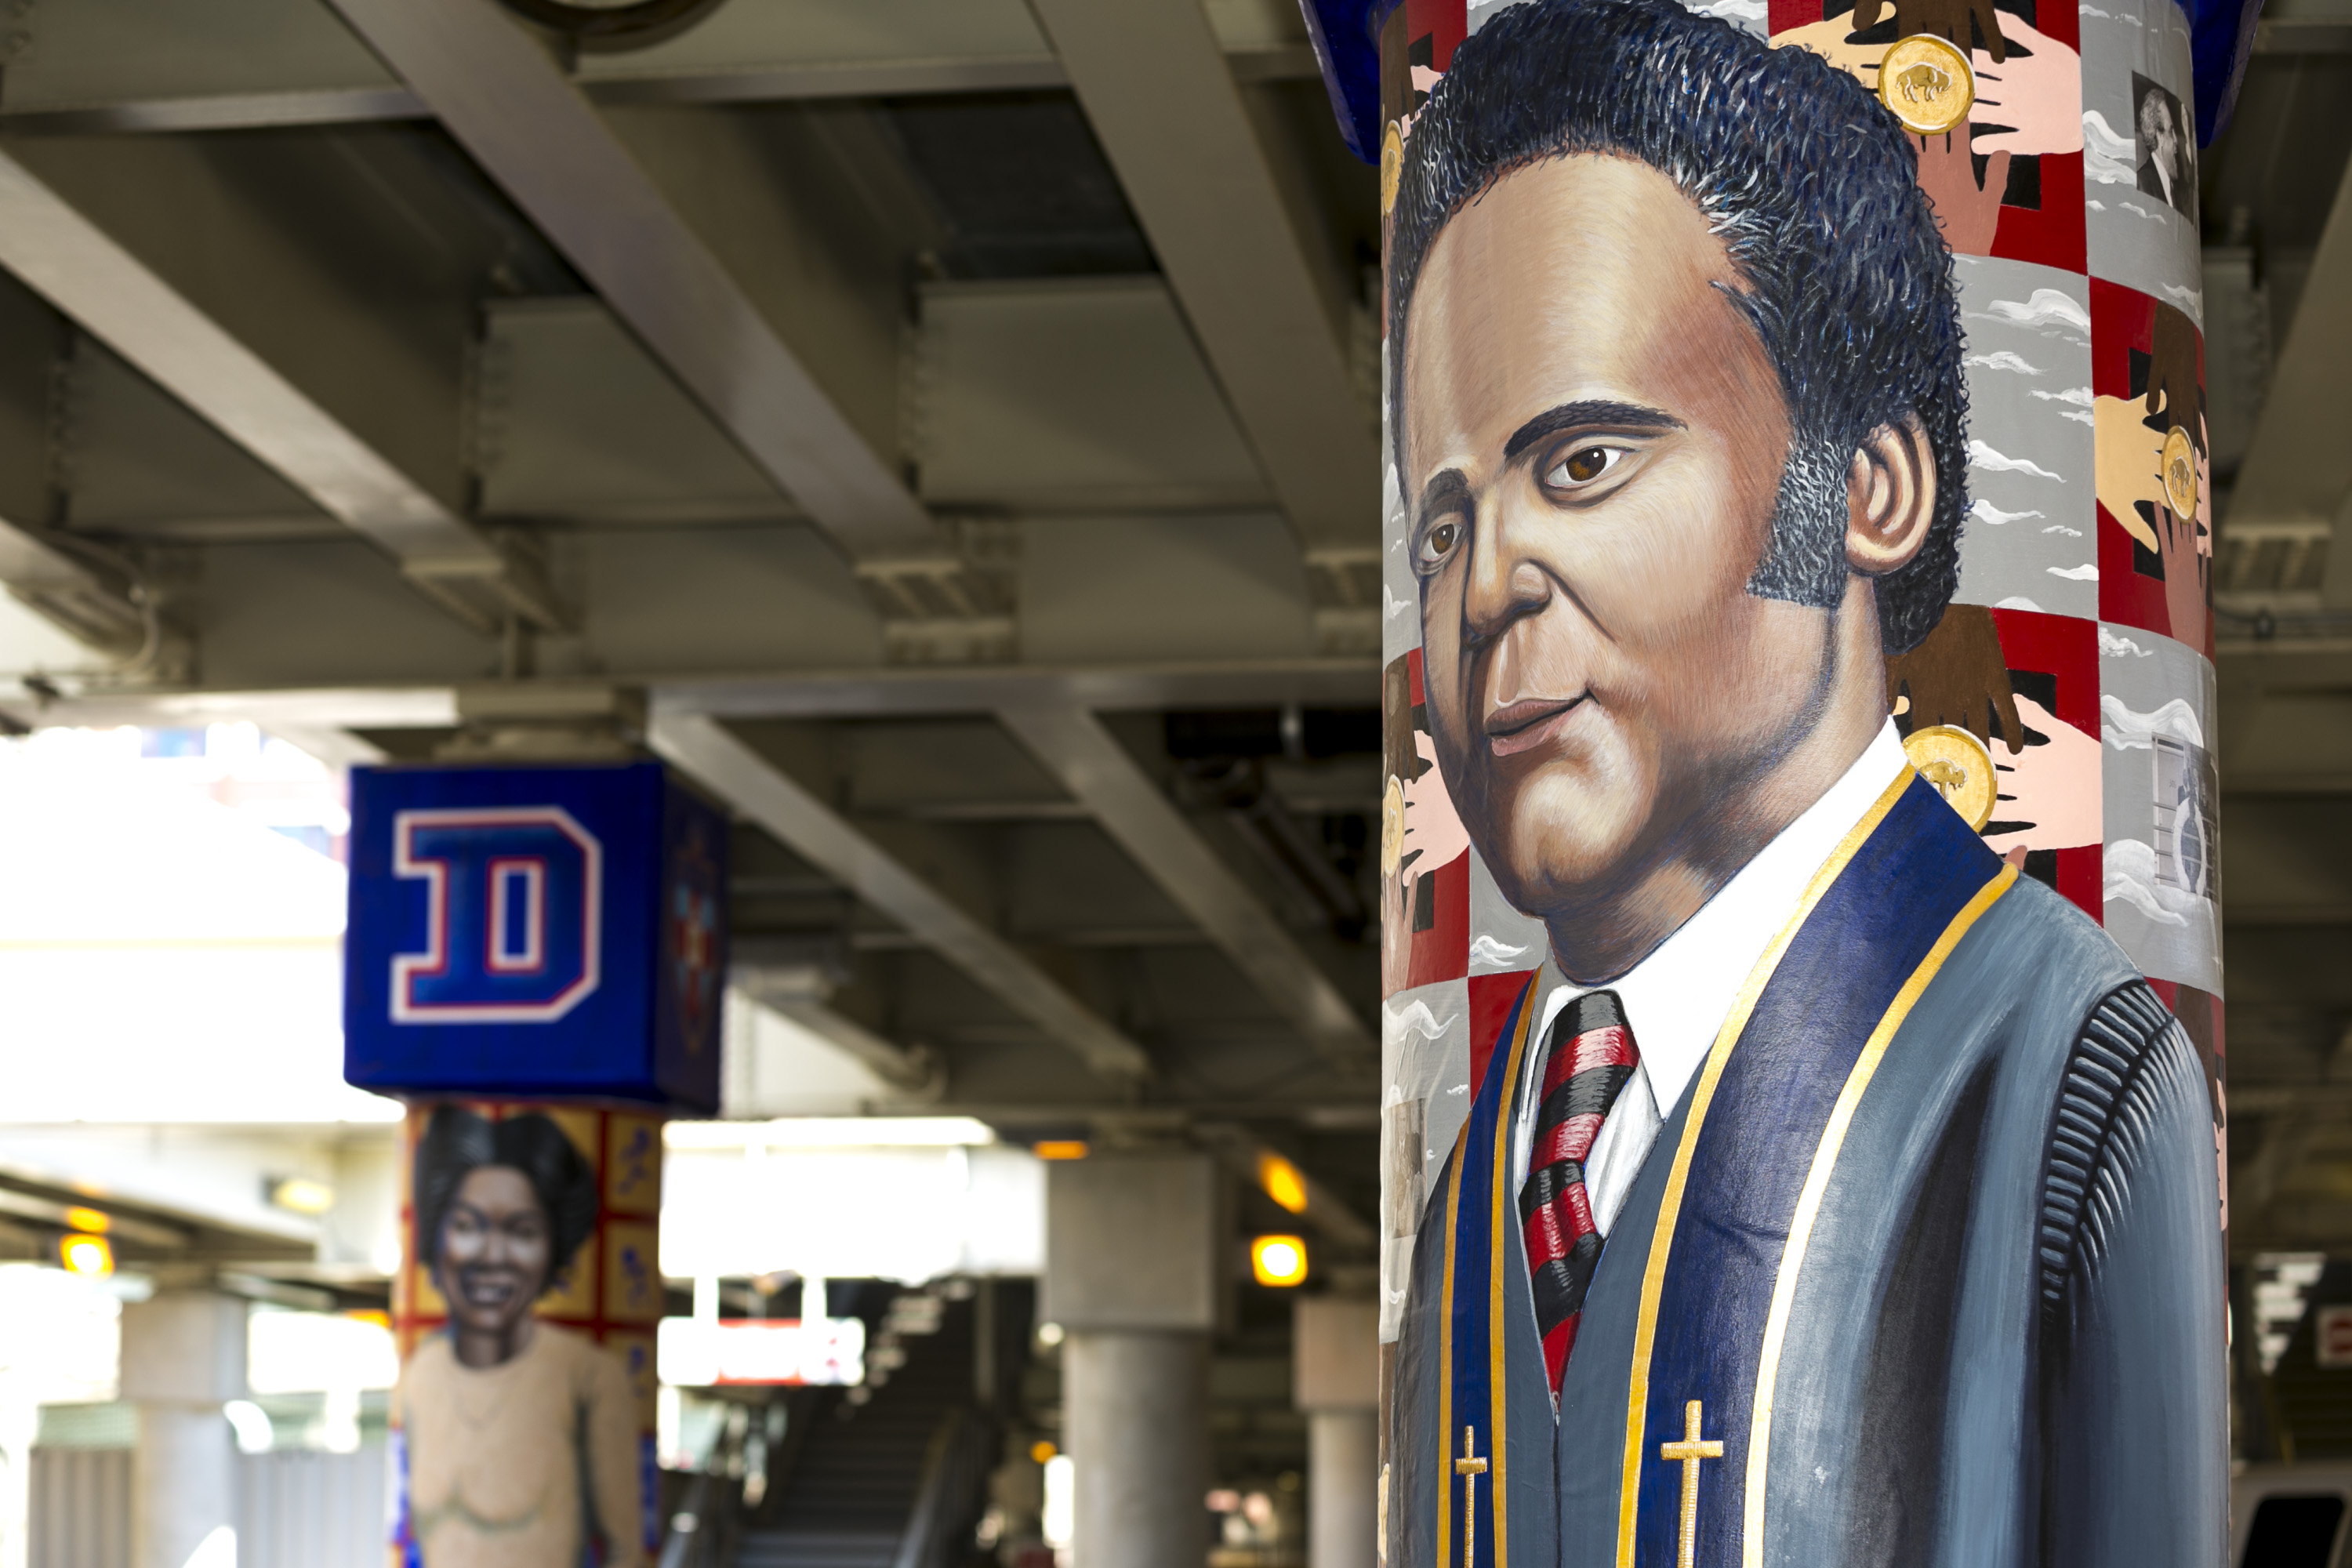 The mural of civil rights activist and DePaul Law School graduate Benjamin Hooks (foreground) is painted next to Olympian and DePaul track star •	Mabel “Dolly” Landry Staton. The murals are part of a larger public art project honoring important historical figures from DePaul's past. (DePaul University/Joel Dik)